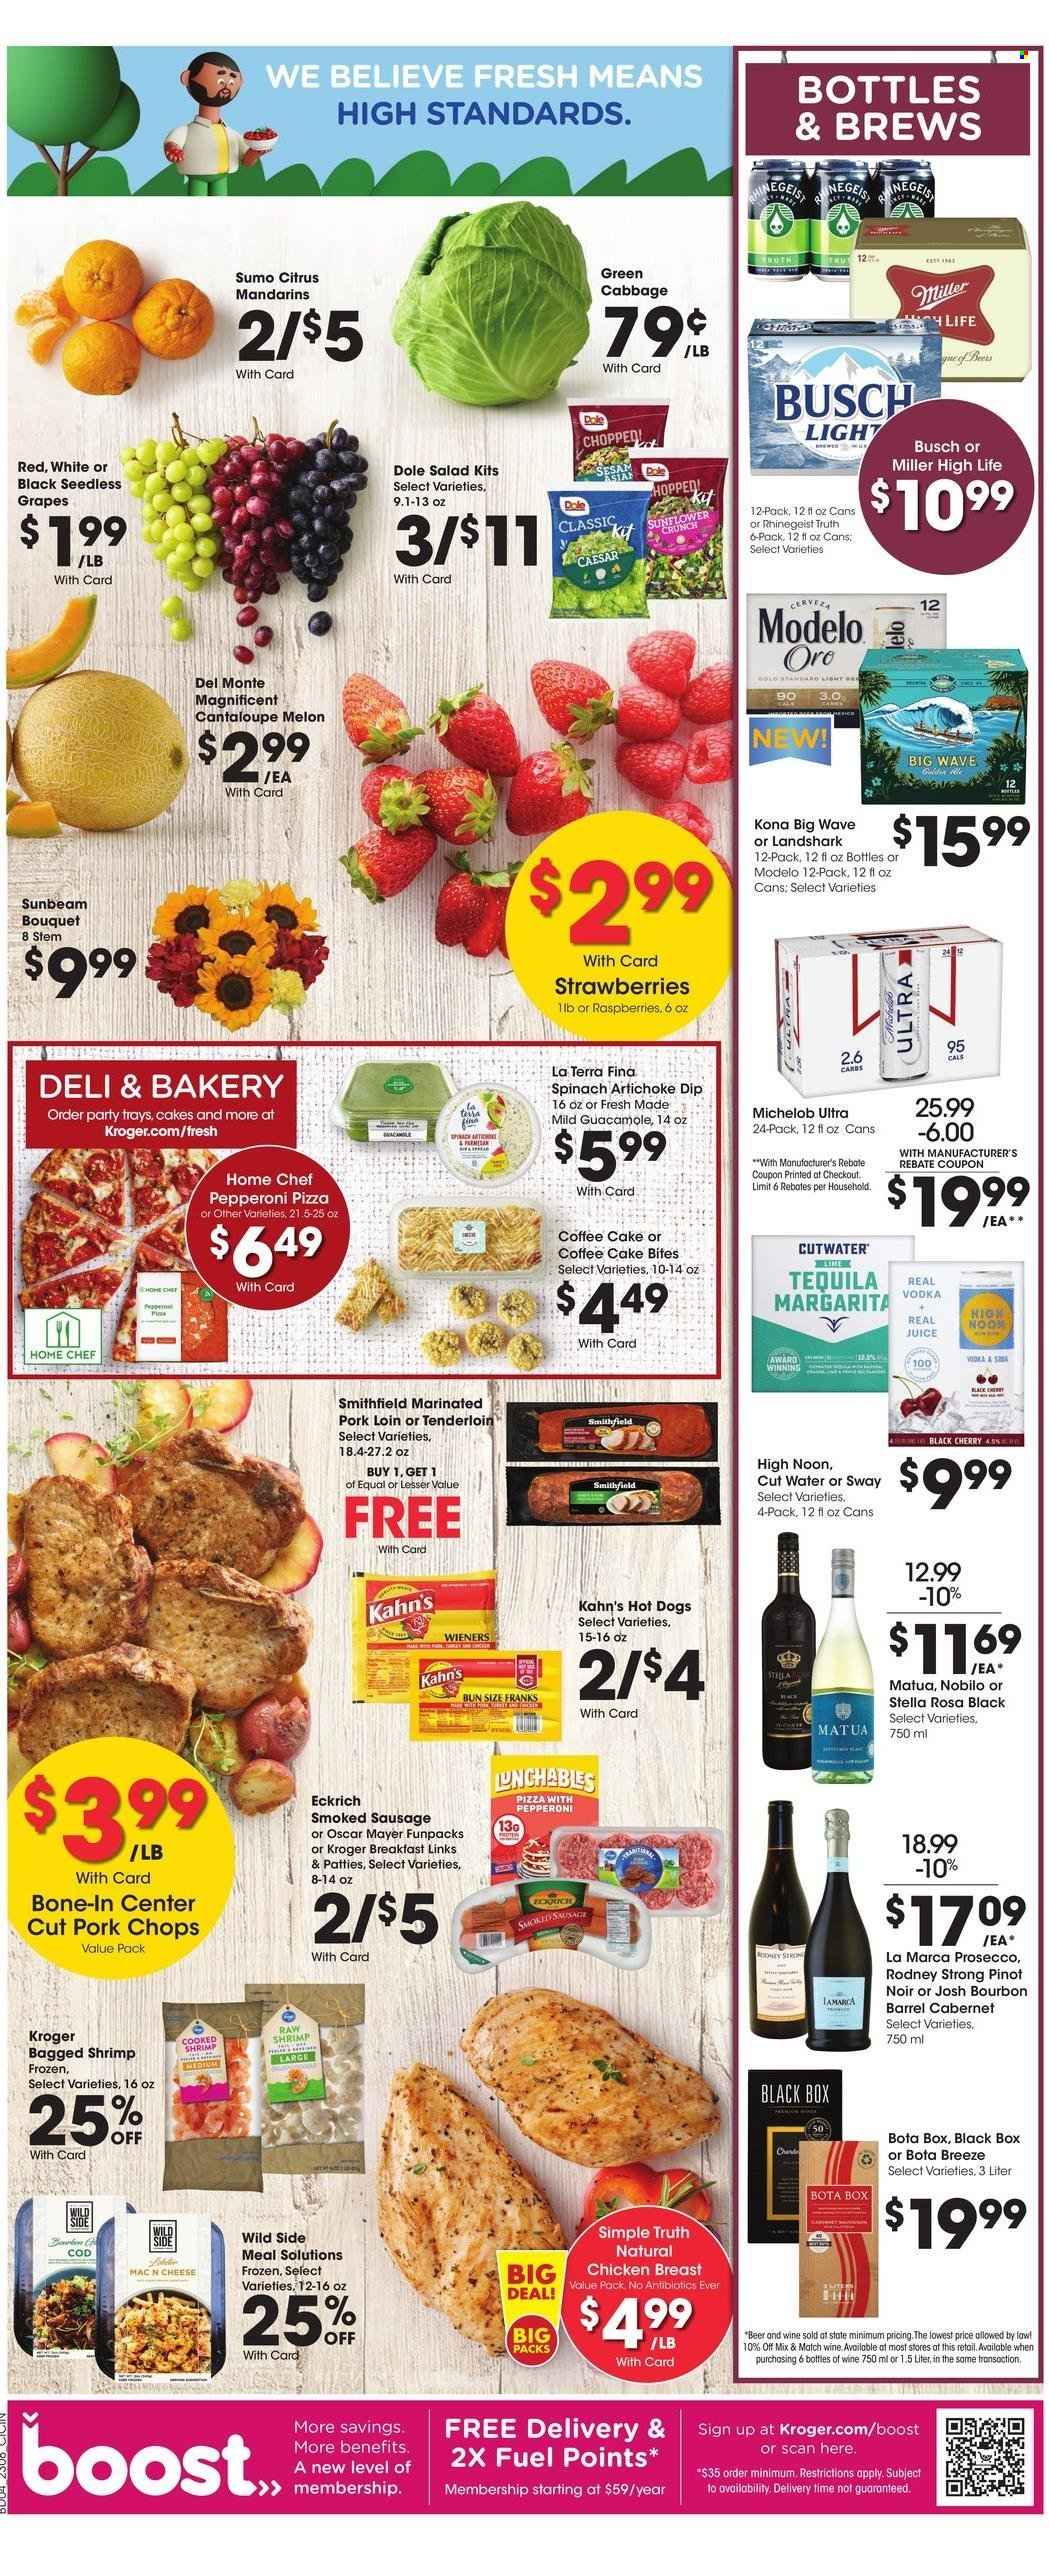 thumbnail - Kroger Flyer - 03/22/2023 - 03/28/2023 - Sales products - cake, coffee cake, cabbage, cantaloupe, Dole, grapes, mandarines, seedless grapes, cherries, cod, shrimps, hot dog, pizza, Lunchables, Oscar Mayer, sausage, smoked sausage, pepperoni, guacamole, dip, Del Monte, juice, water, Boost, Cabernet Sauvignon, red wine, prosecco, wine, Pinot Noir, tequila, vodka, beer, Busch, Miller, Rhinegeist, Modelo, chicken breasts, chicken, pork chops, pork loin, pork meat, marinated pork, WAVE, Sunbeam, chard, bouquet, melons, Michelob, sumo citrus. Page 7.